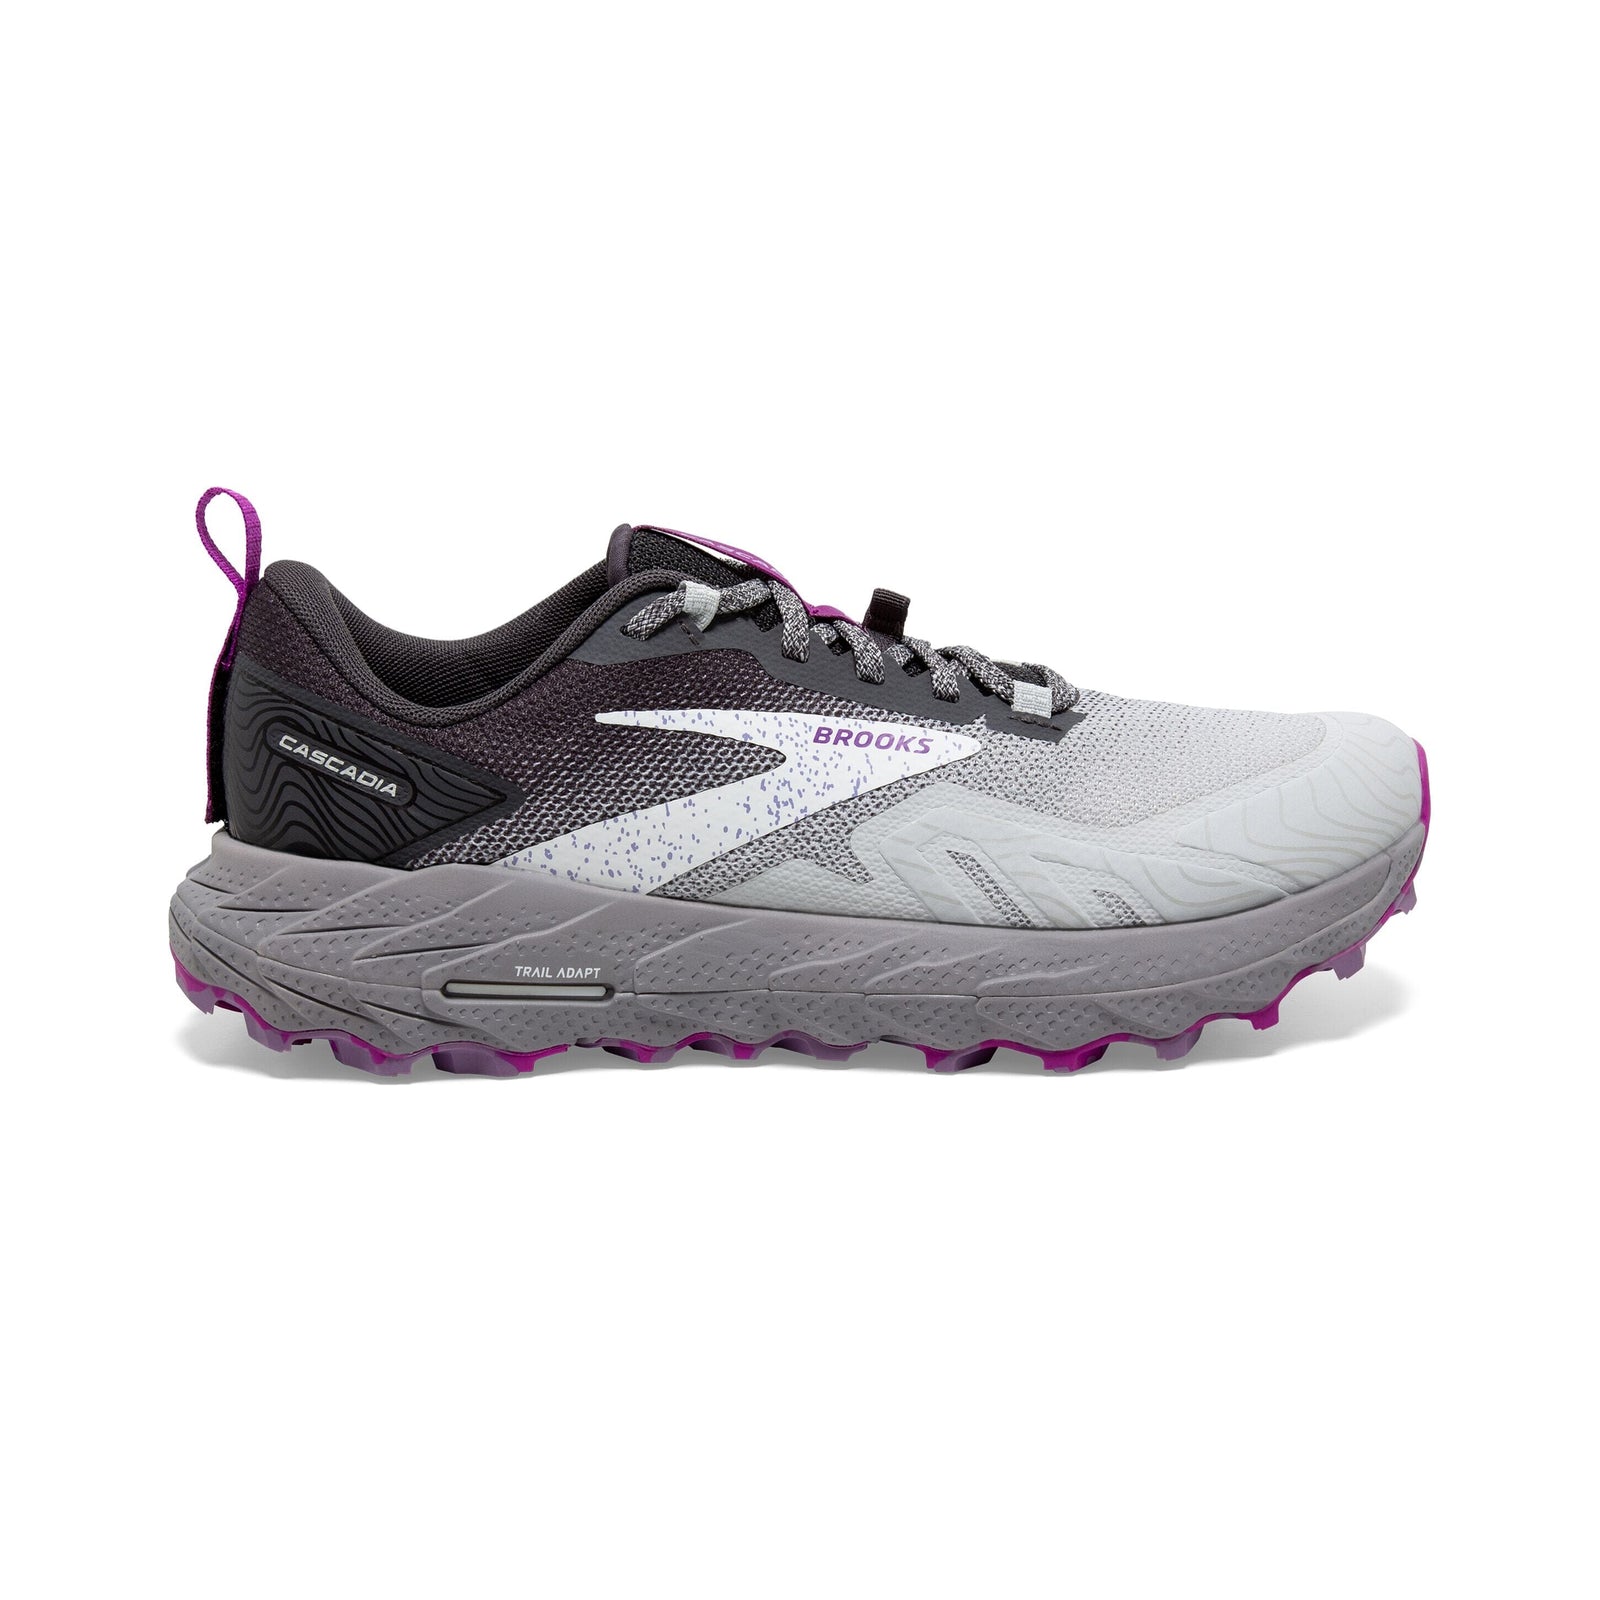 Brooks Women's Cascadia 17 Trail Running Shoes Oyster/Blackened Pearl/Purple Wide (D) US 7